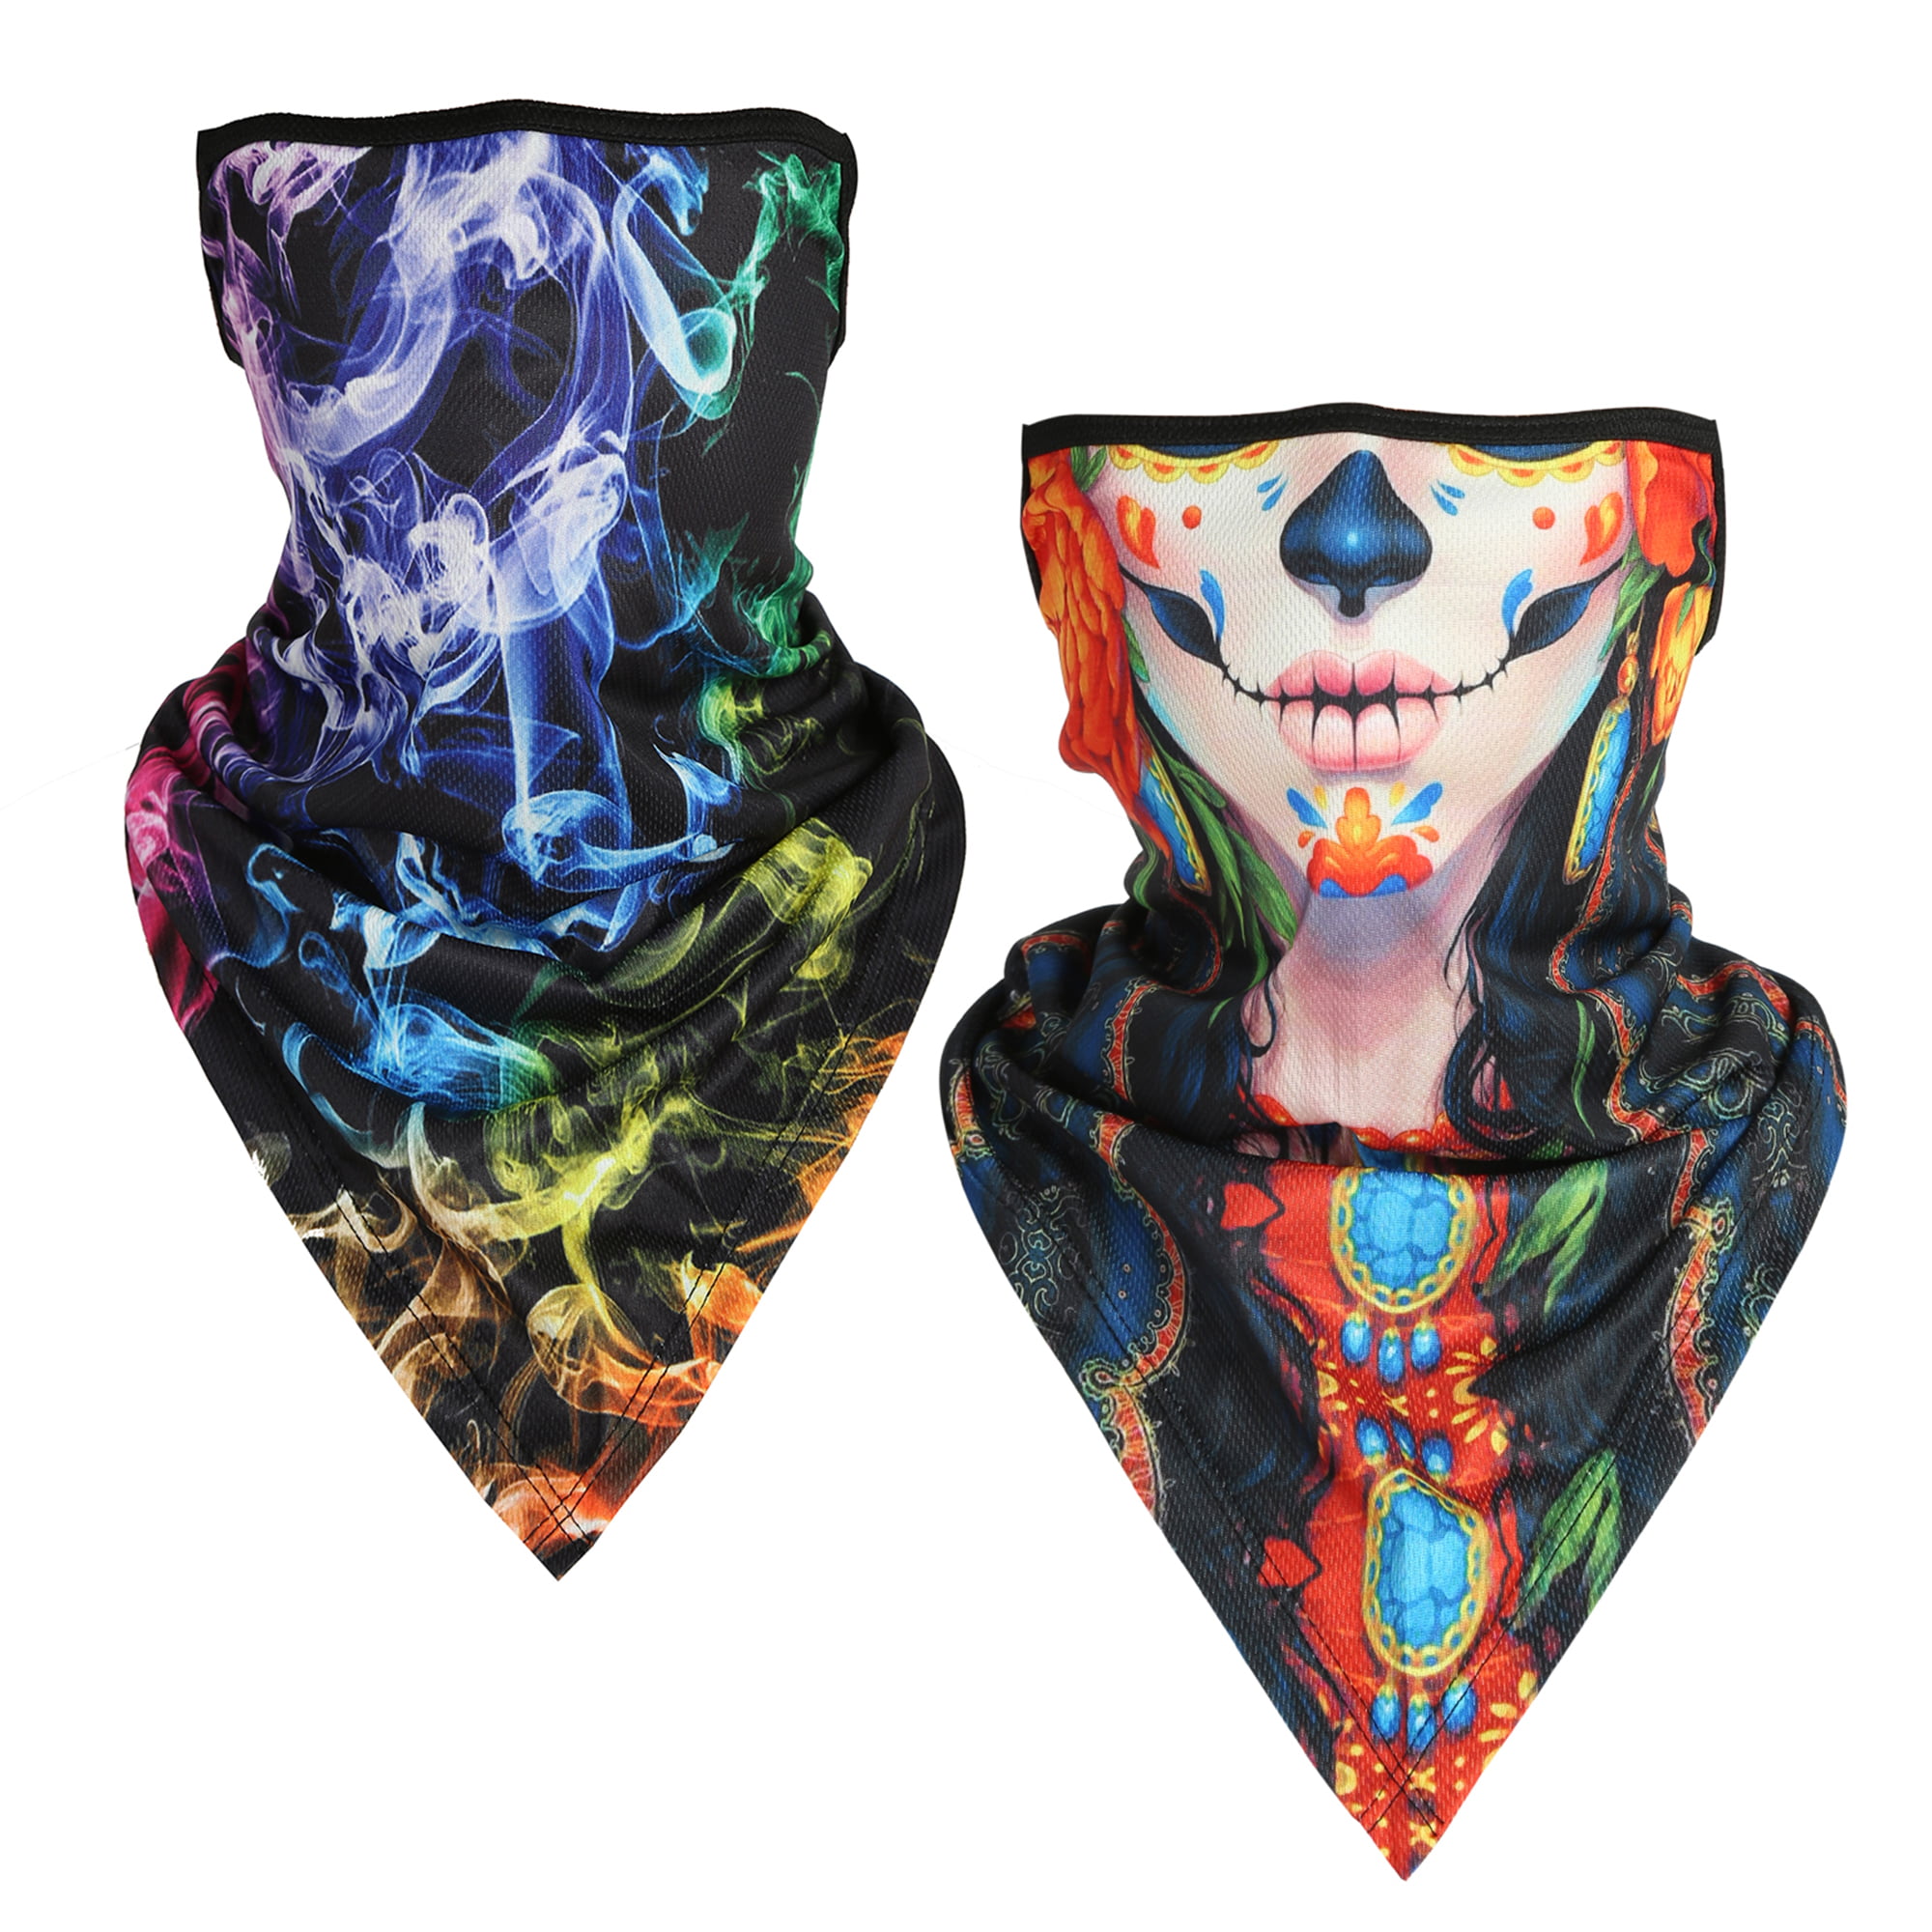 Bandana Neck Gaiter face covering Scarf a favorite of bank robbers and pirates 